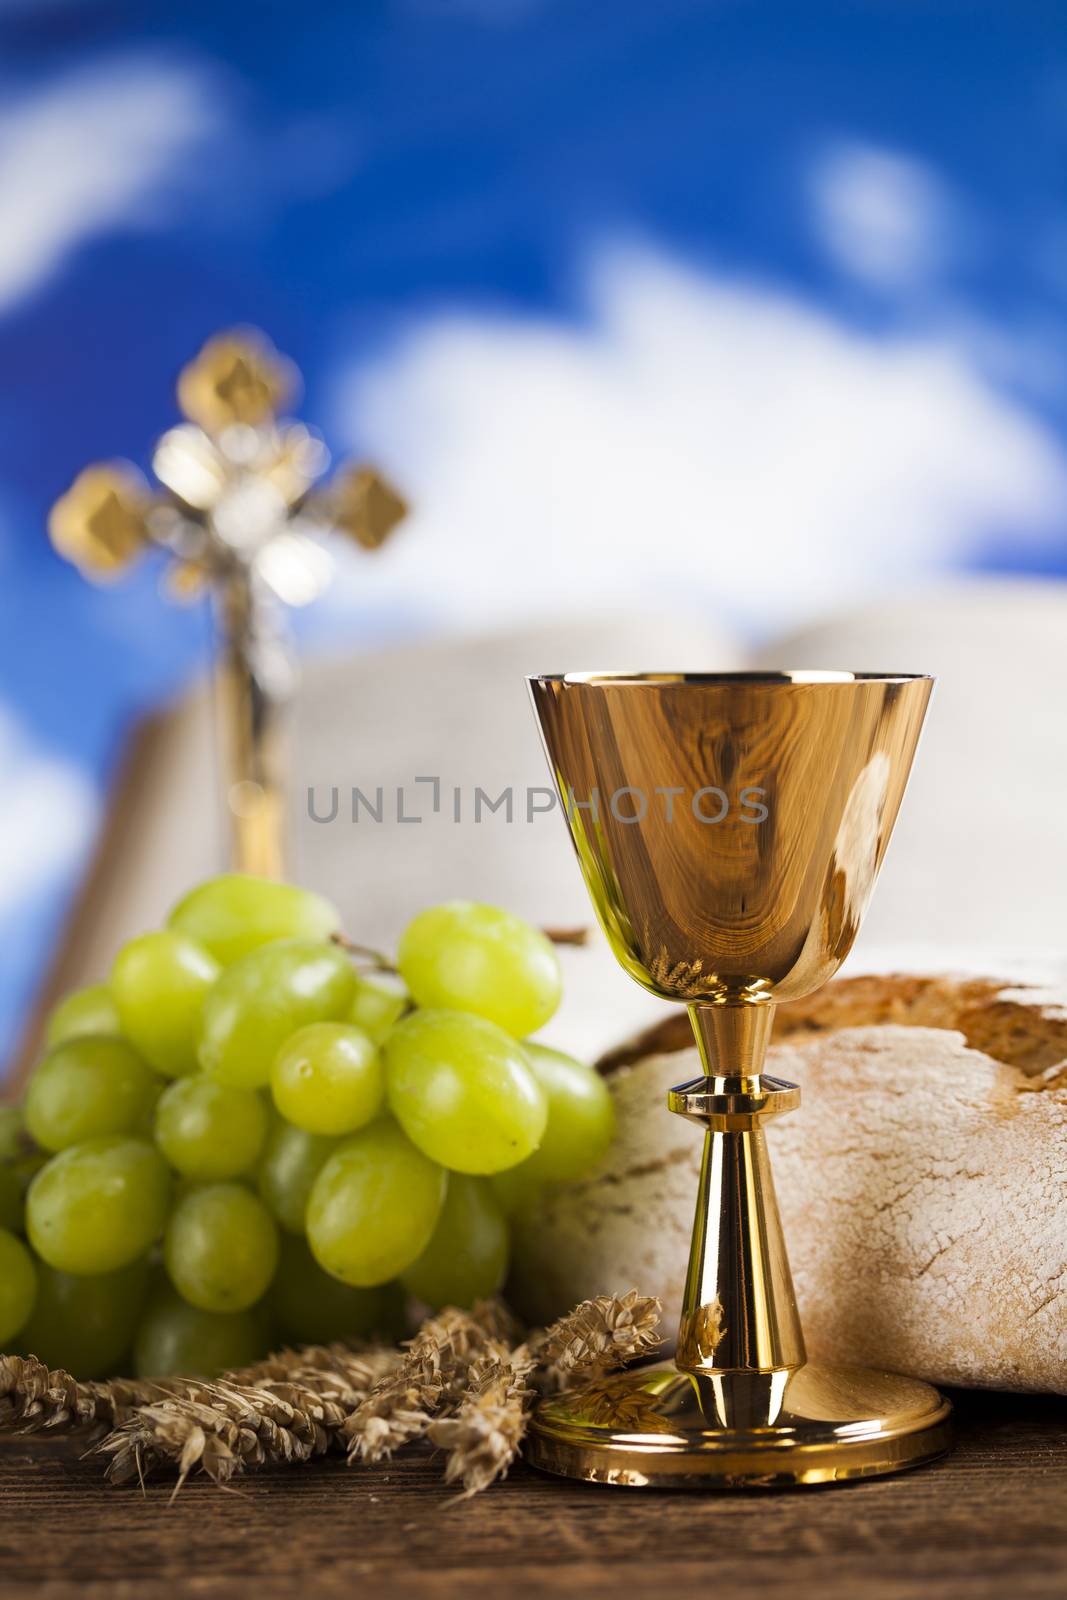 Eucharist symbol of bread and wine, chalice and host, First comm by JanPietruszka